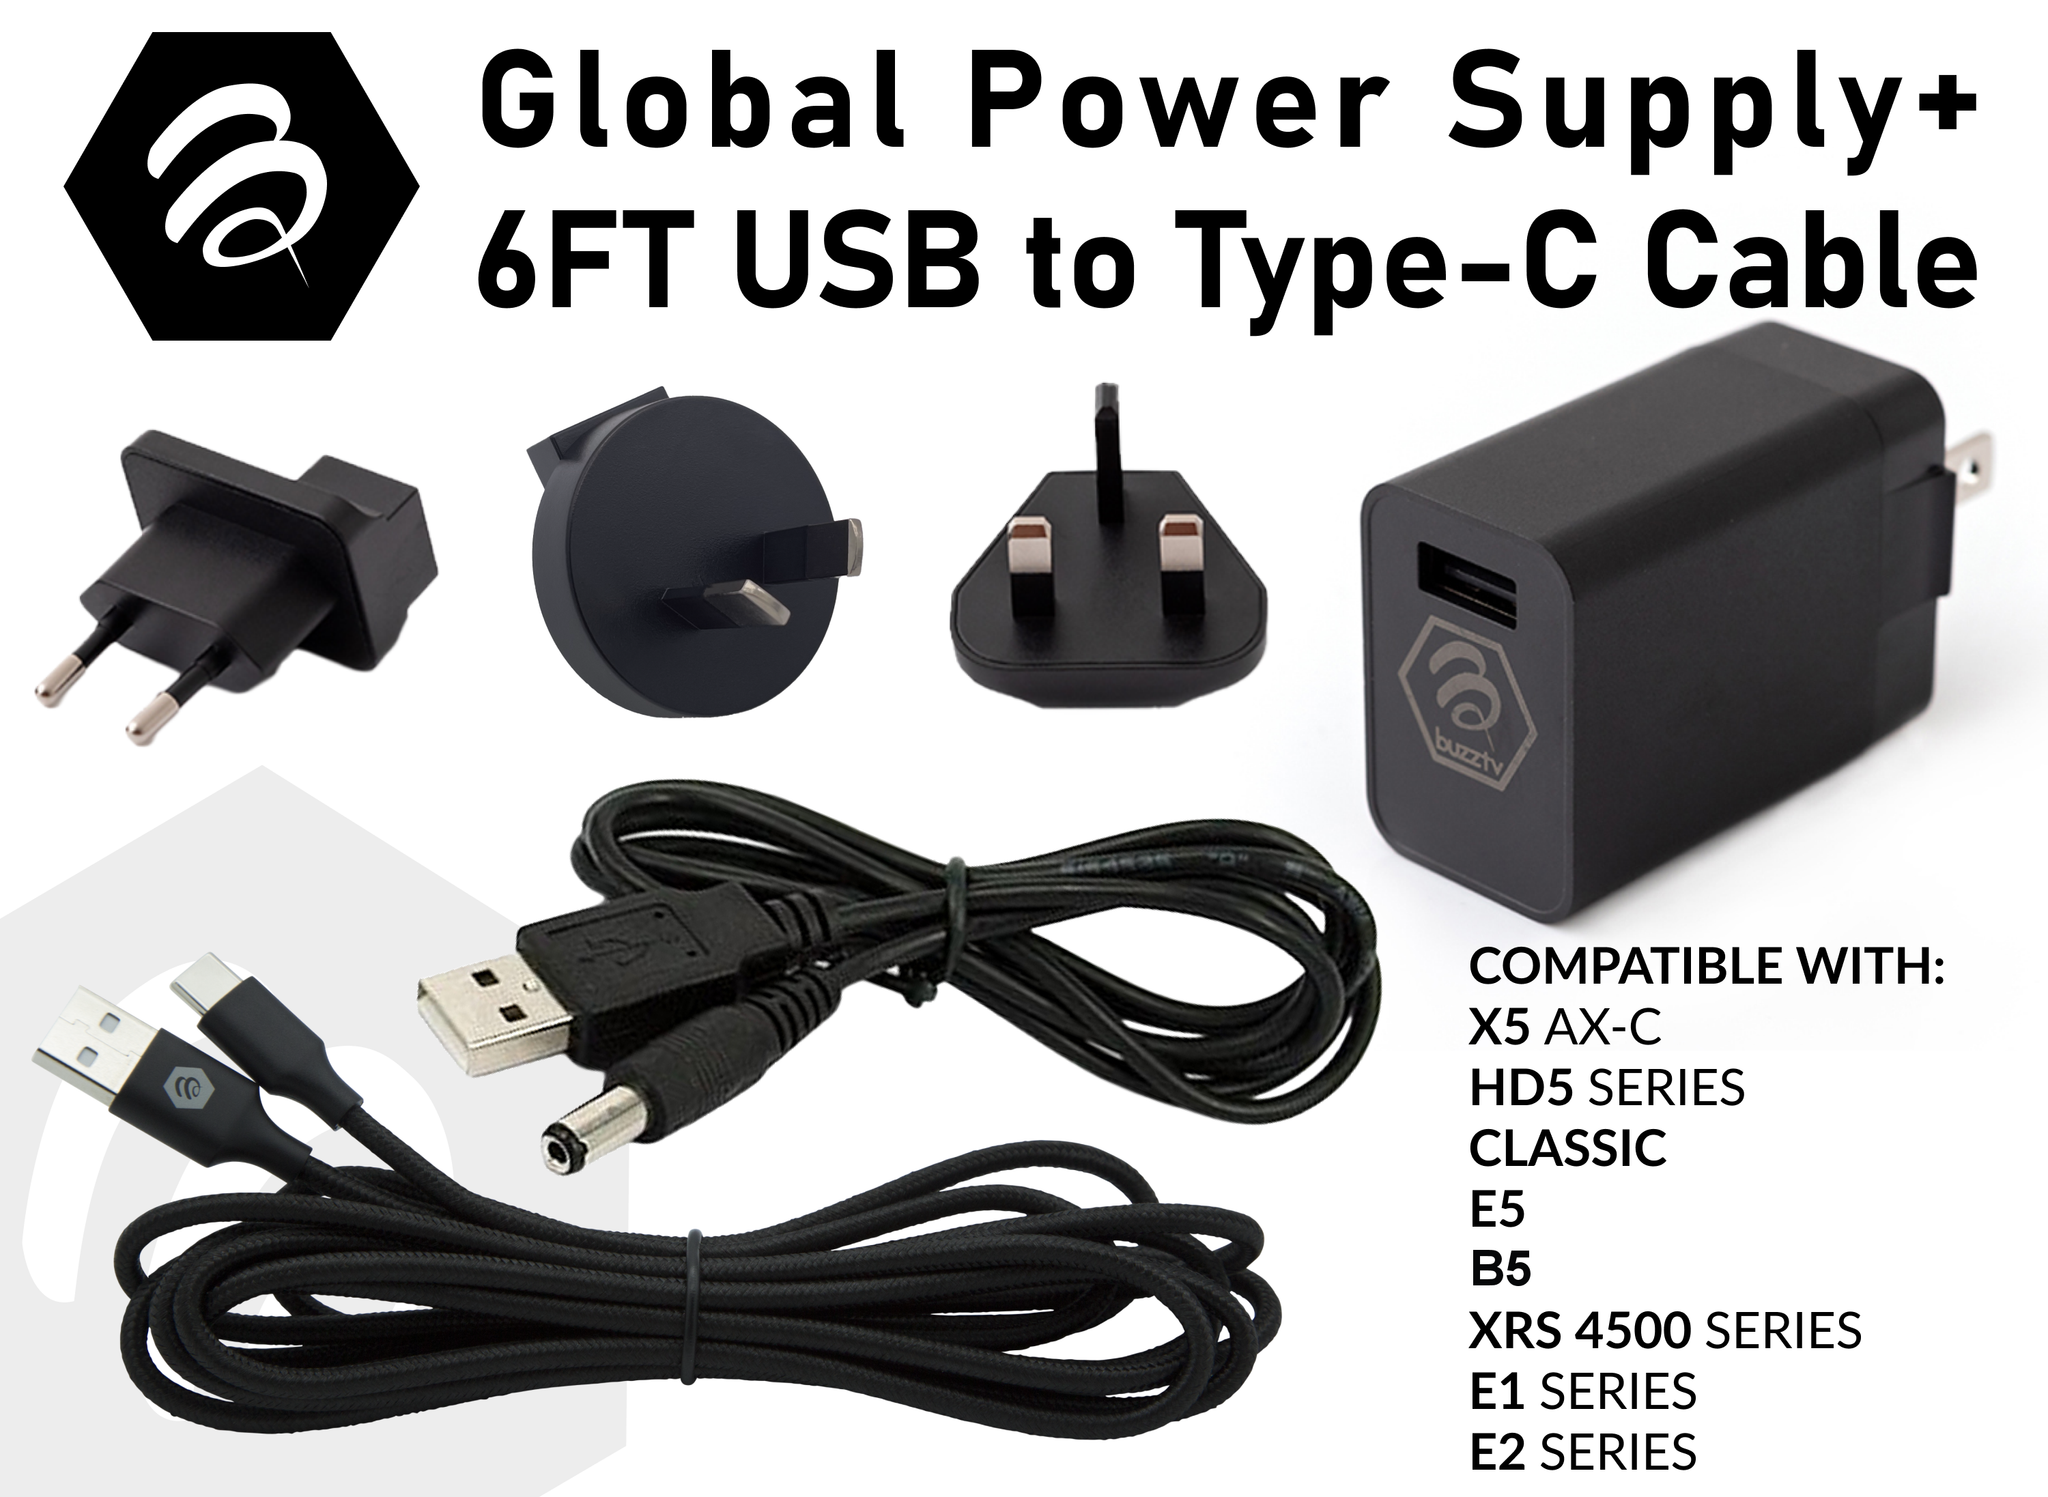 BuzzTV 5V Global Power Supply + 6FT Type "C" Cable